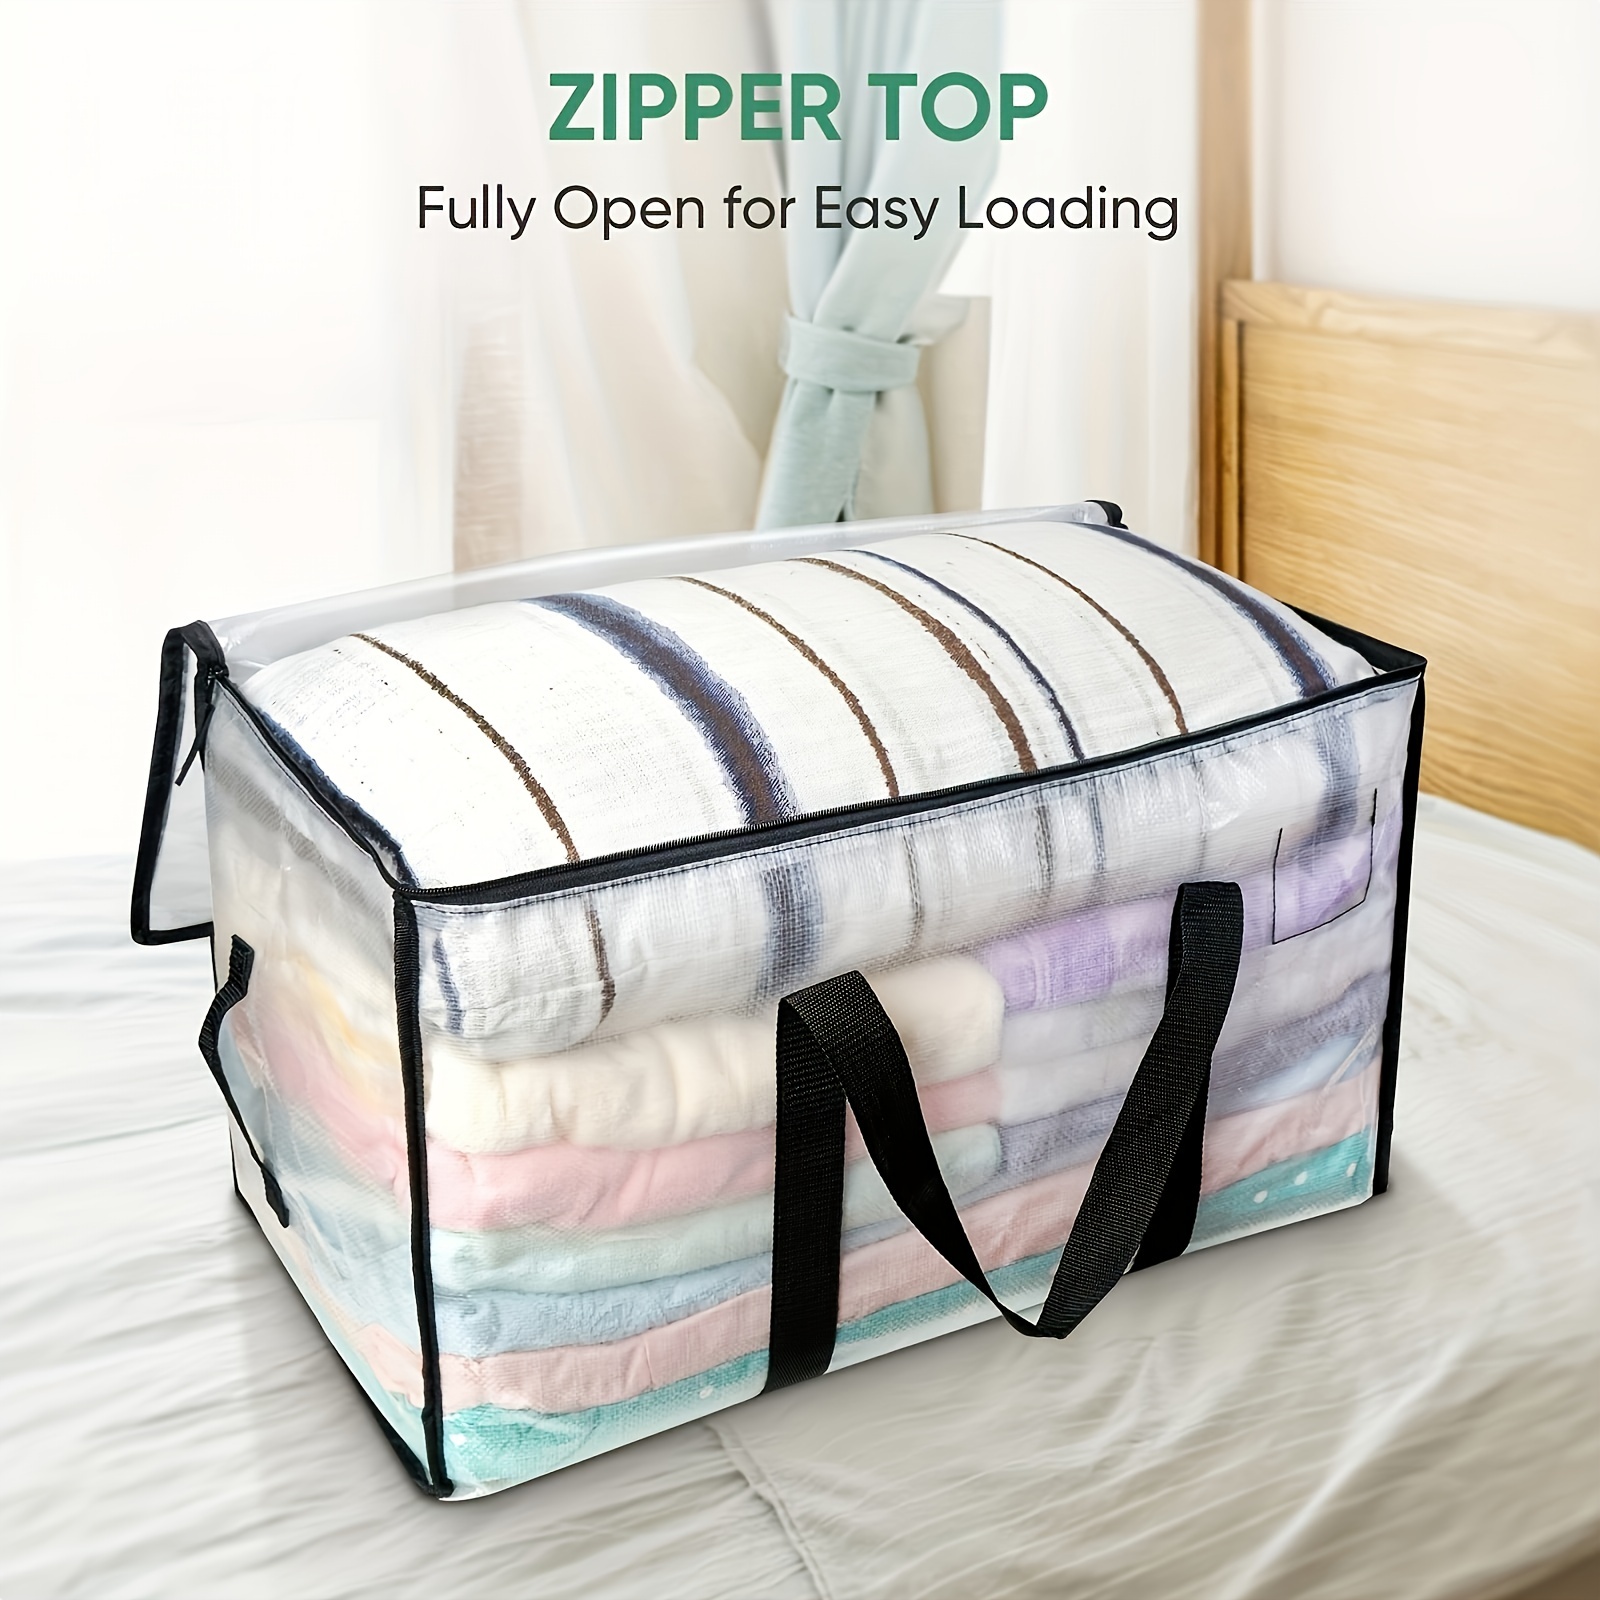 

Heavy Duty Oversized Storage Bag For Moving, College Dorm, Traveling, Packing Supplies, Reusable And Sustainable Organizer